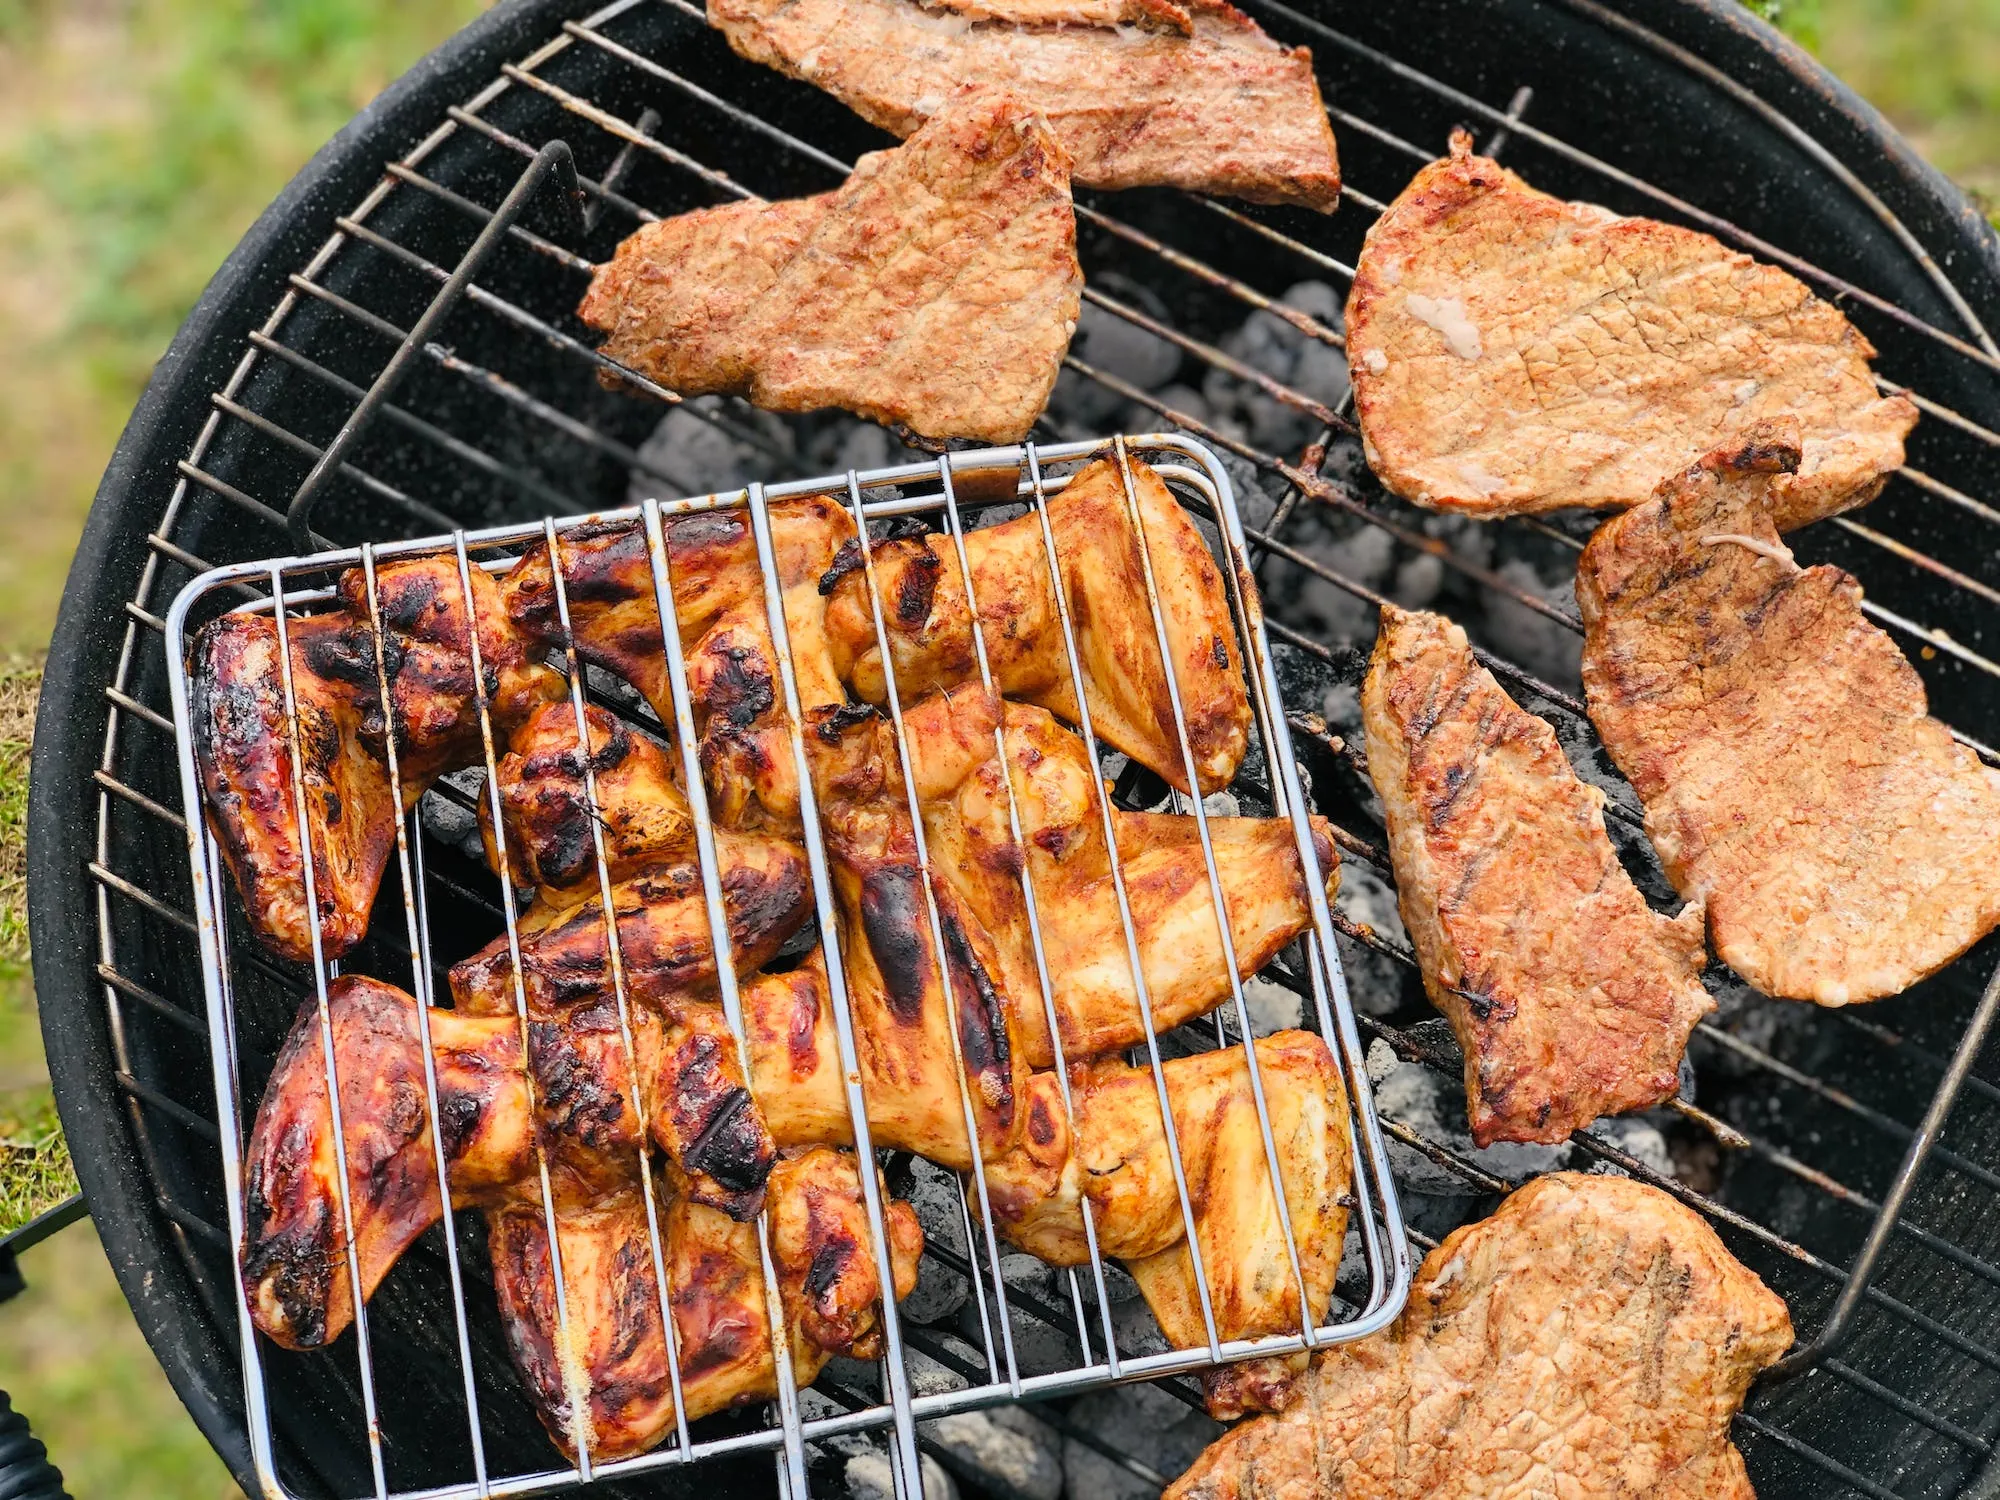 Best Infrared Grills: Top Picks for Juicy and Flavorful Grilling